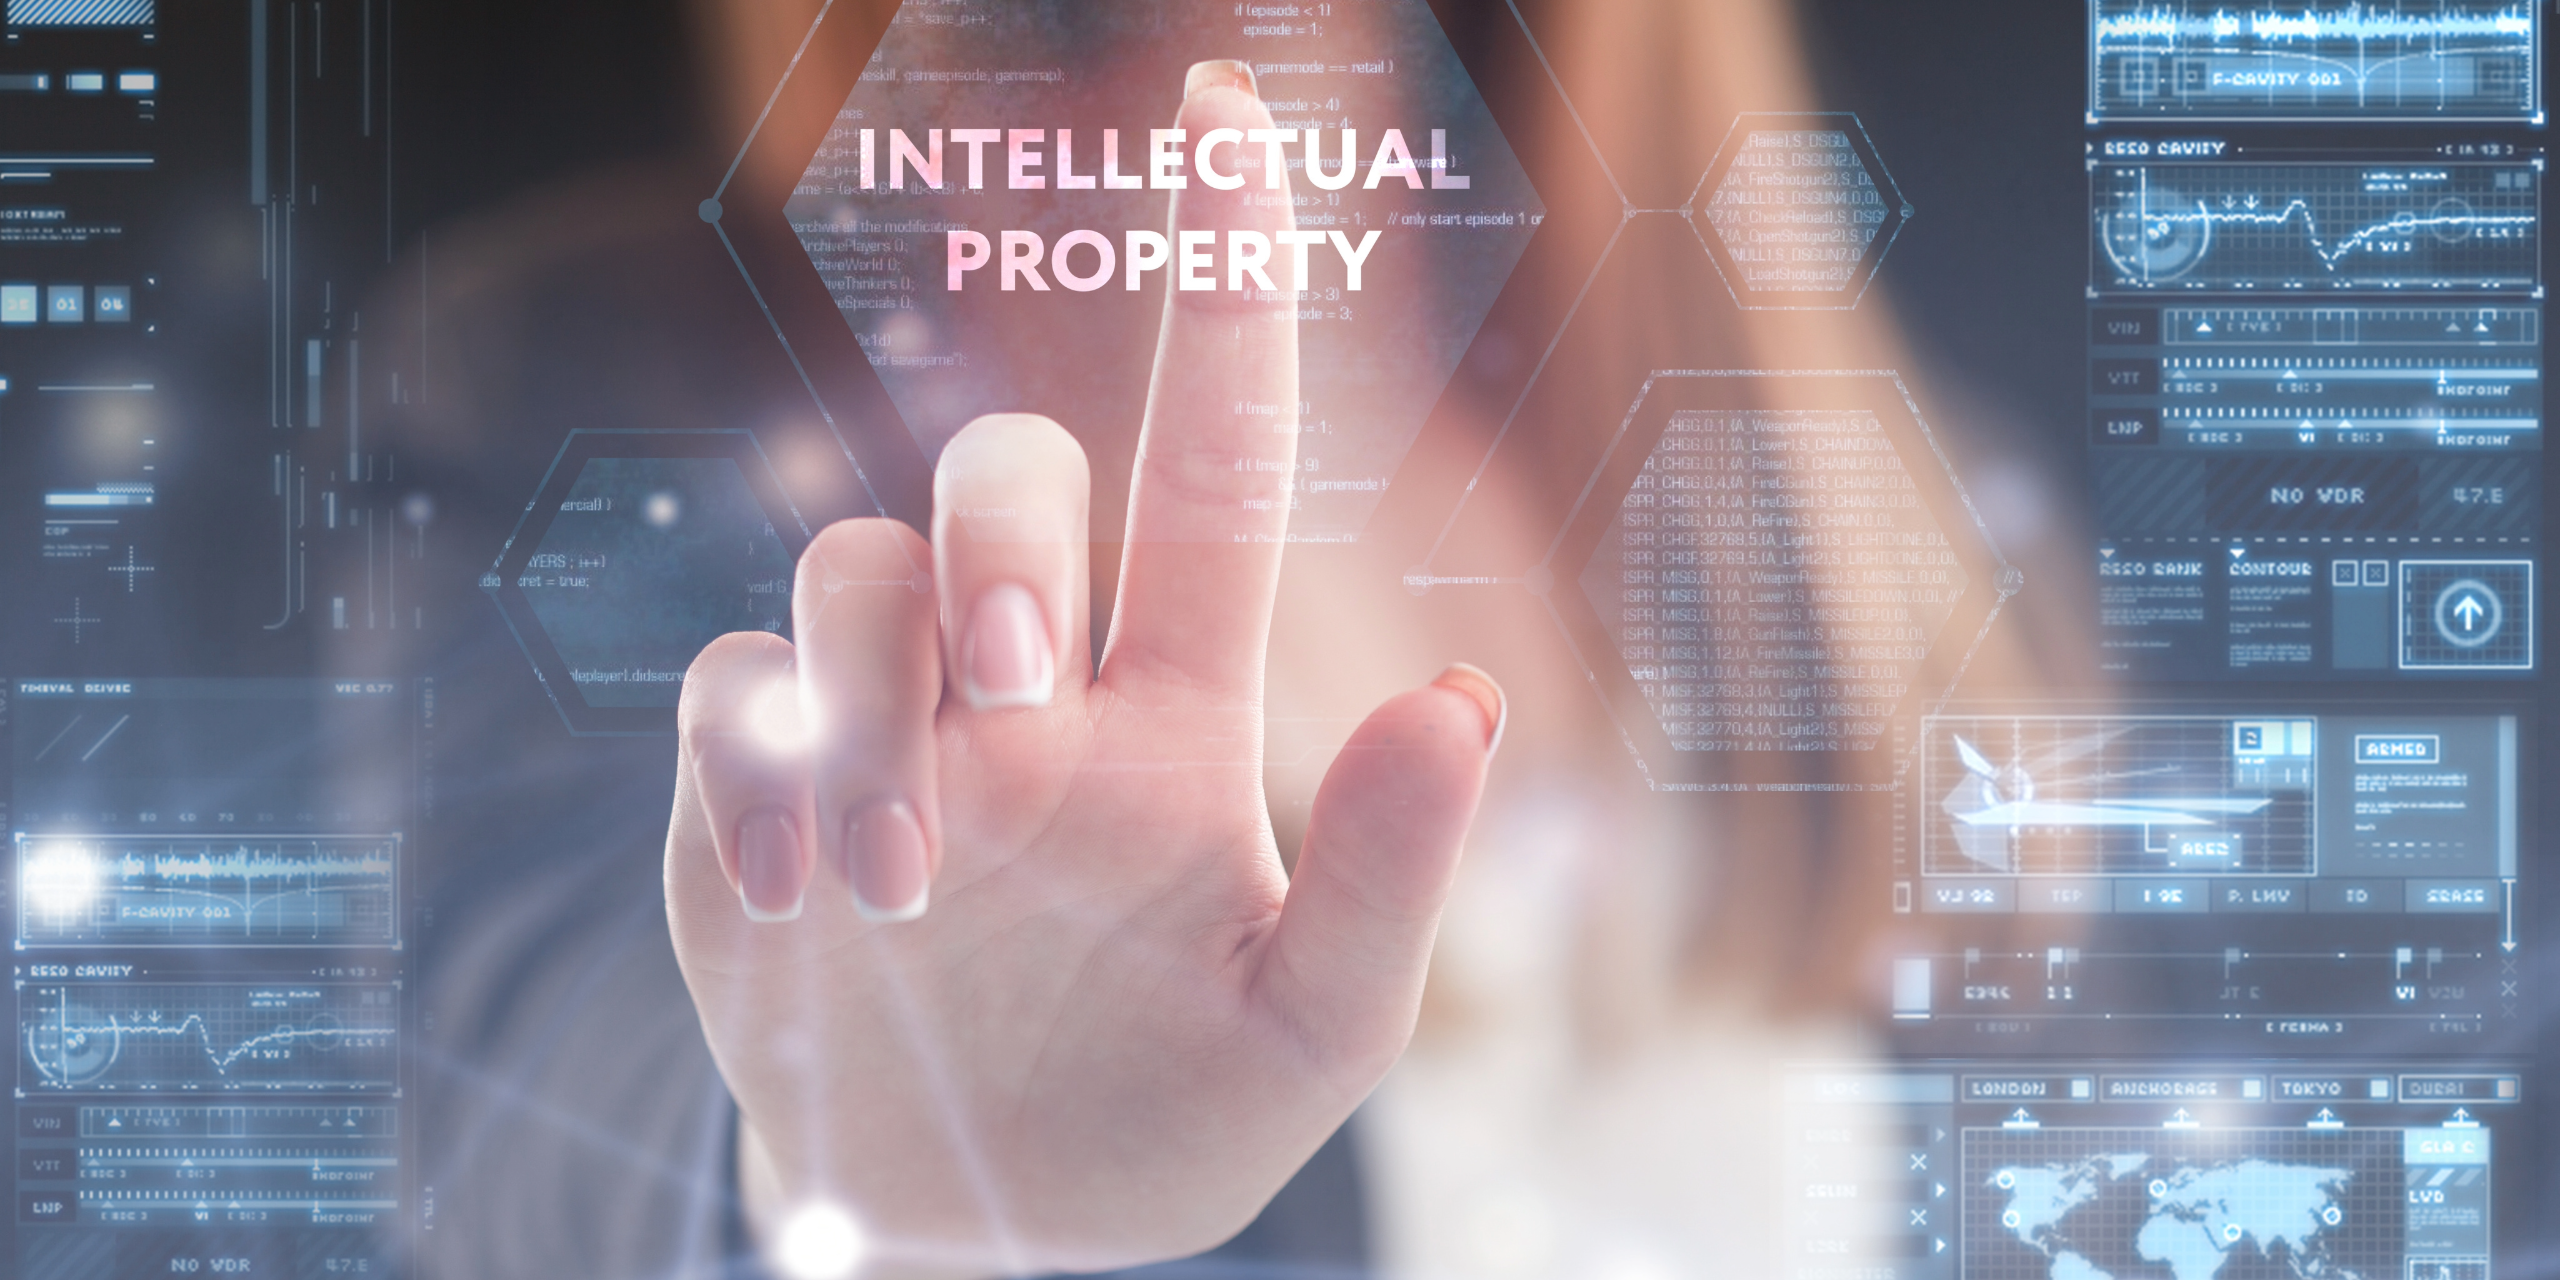 intellectual property for business plan